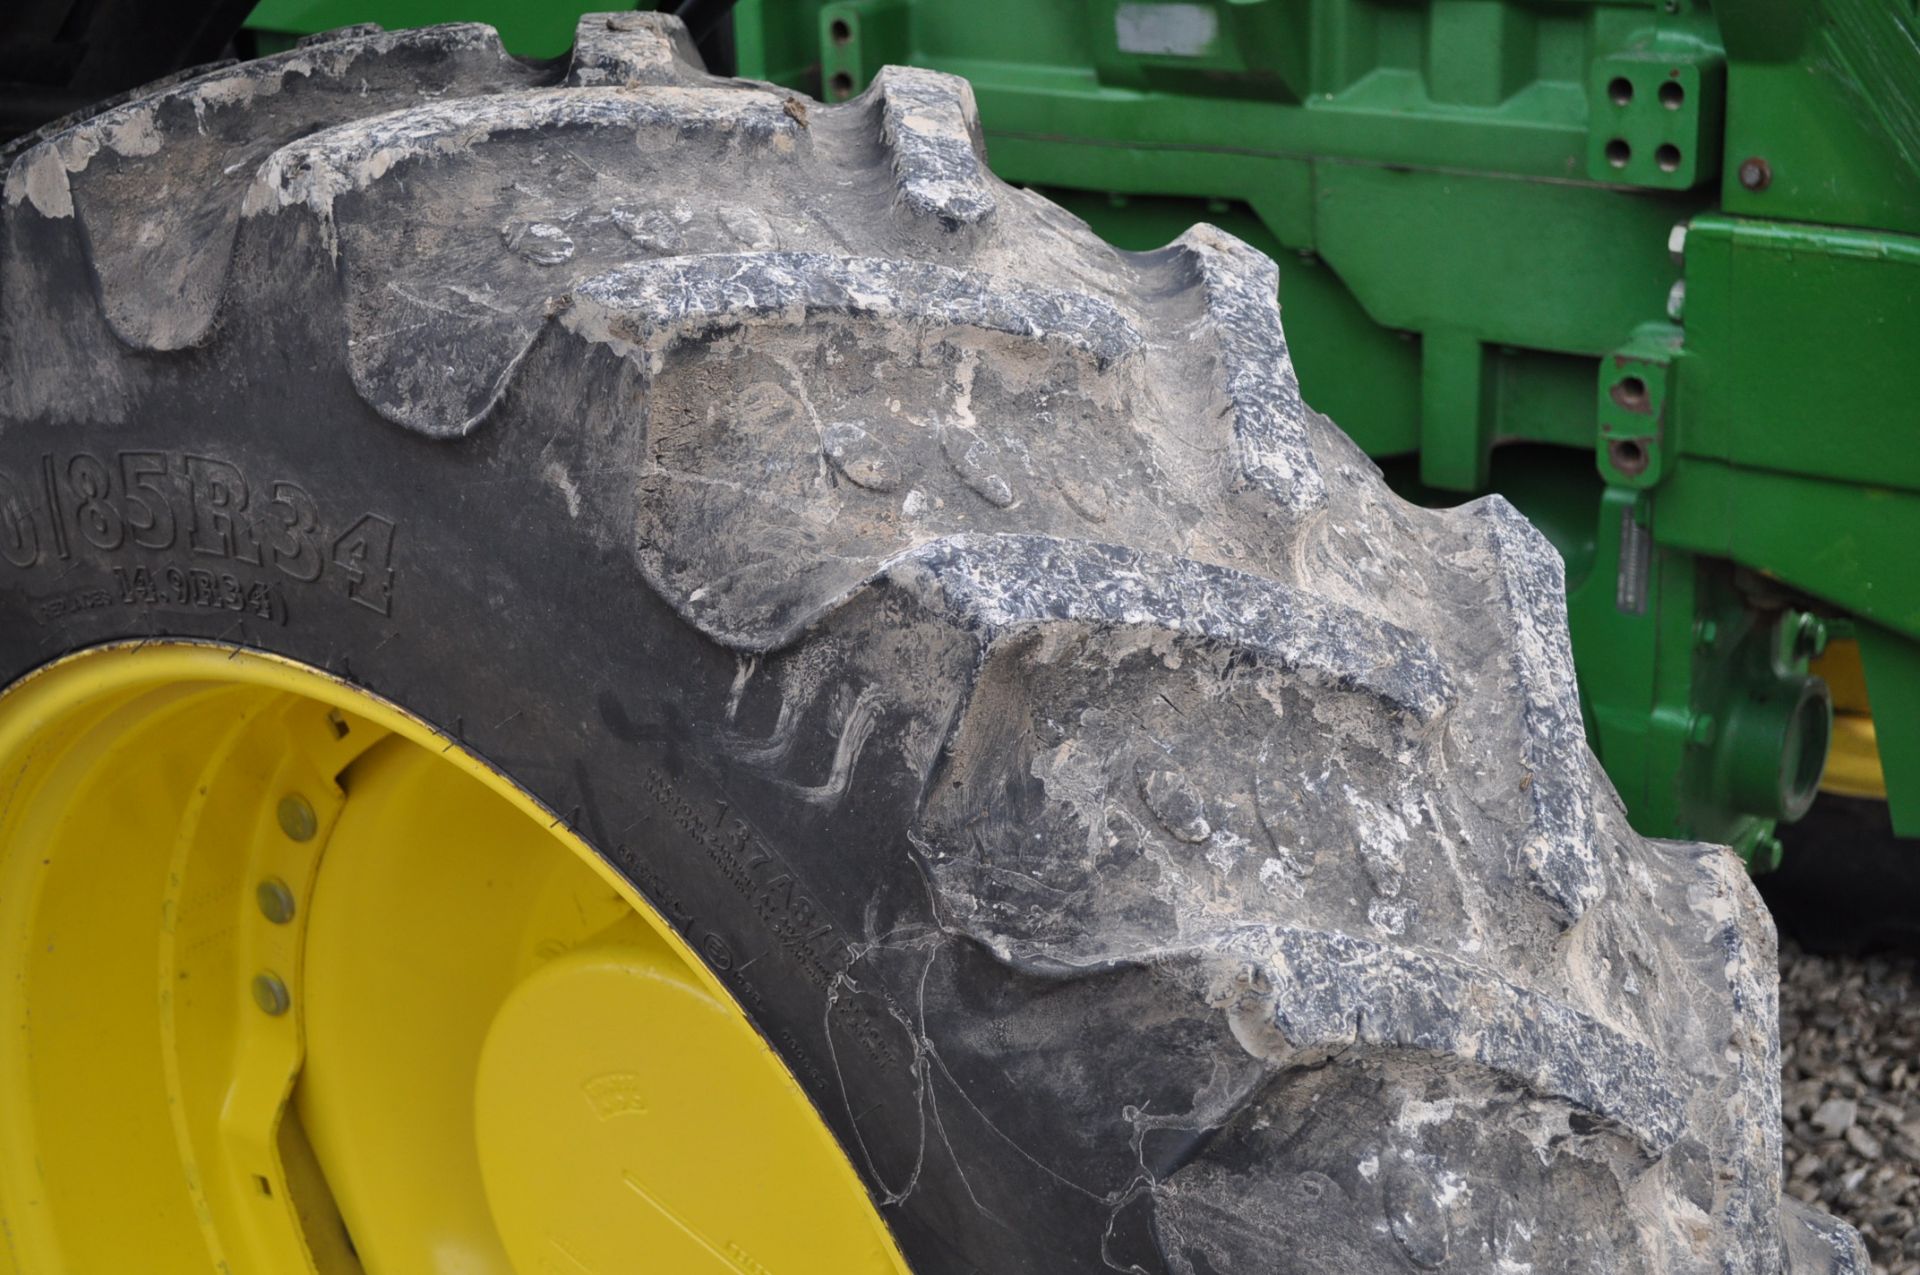 John Deere 8300 tractor, MFWD, 480/80 R 46 duals, 380/85 R 34 front, fenders, front wts, 4 hyd - Image 8 of 21